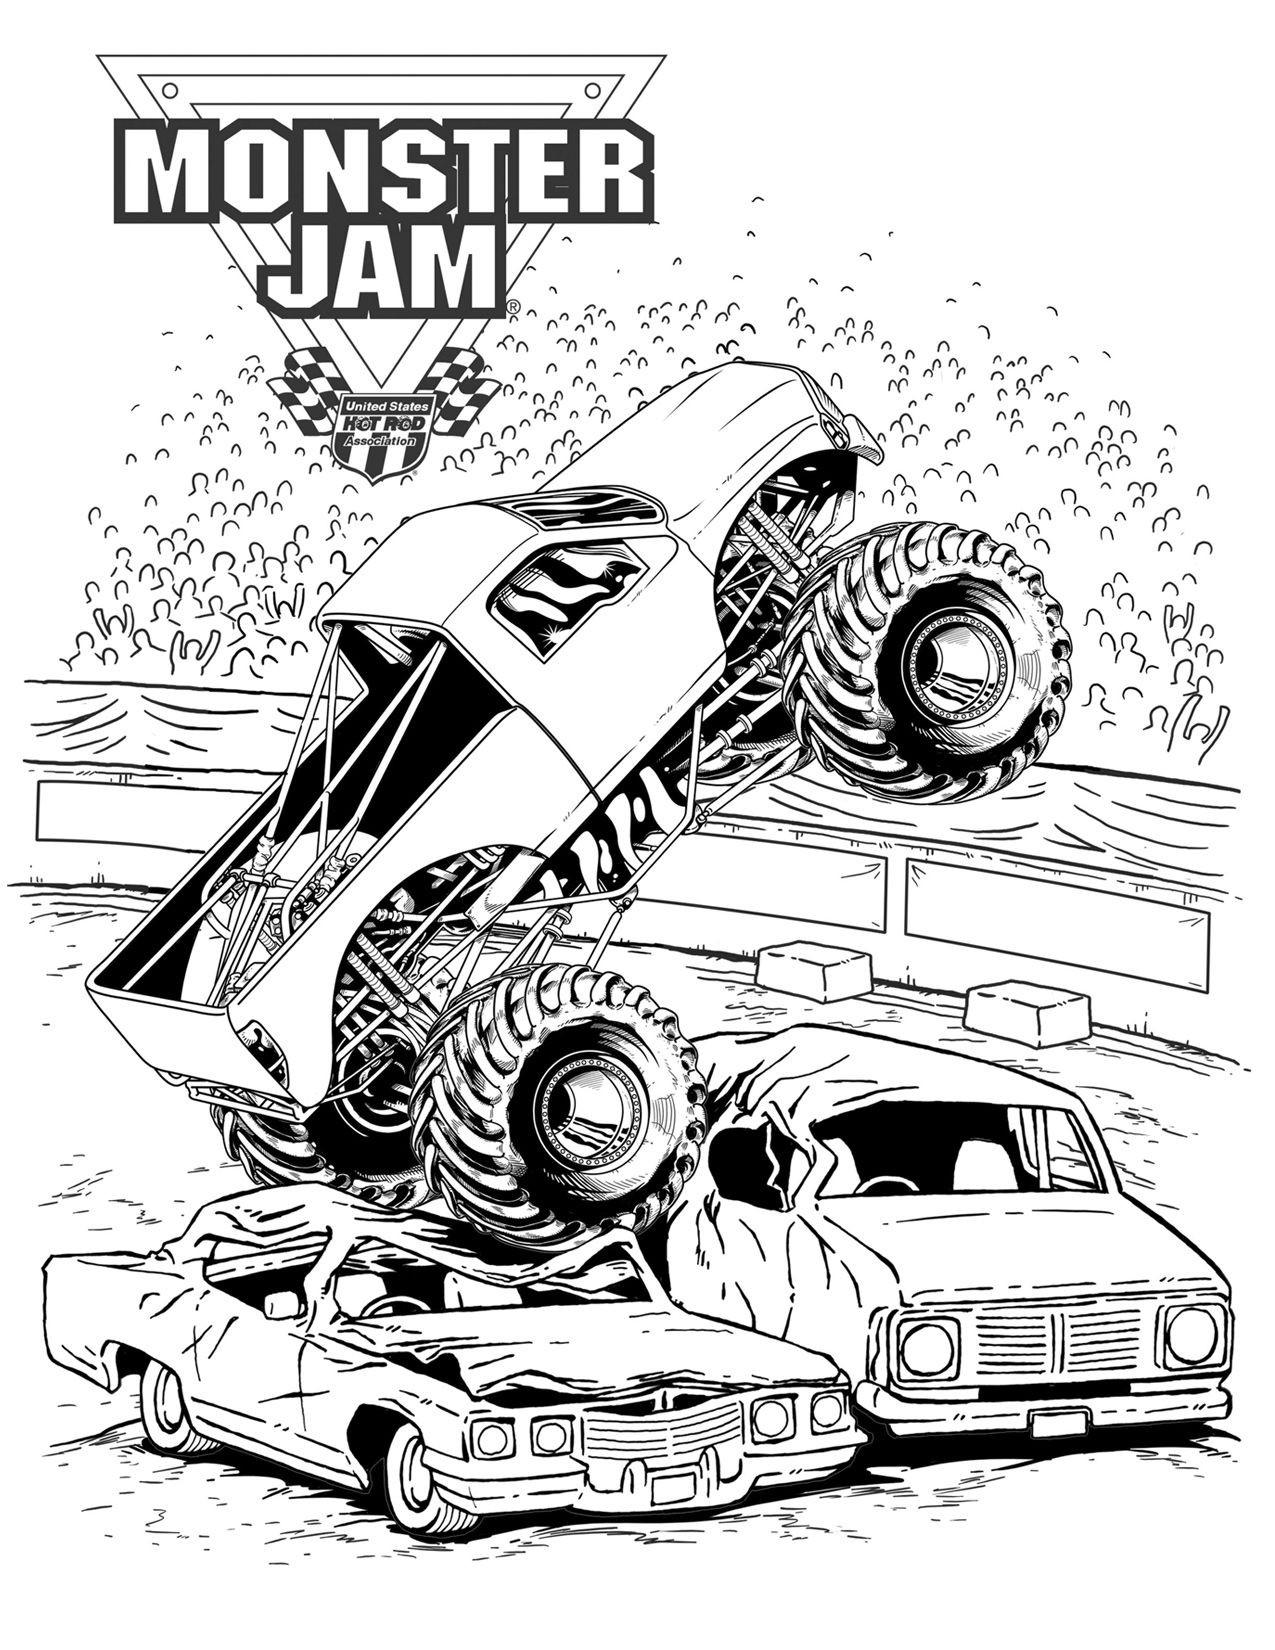 coloring : Free Truck Coloring Pages Best Of Monster Jam Crushing Cars With  Images Free Truck Coloring Pages ~ queens